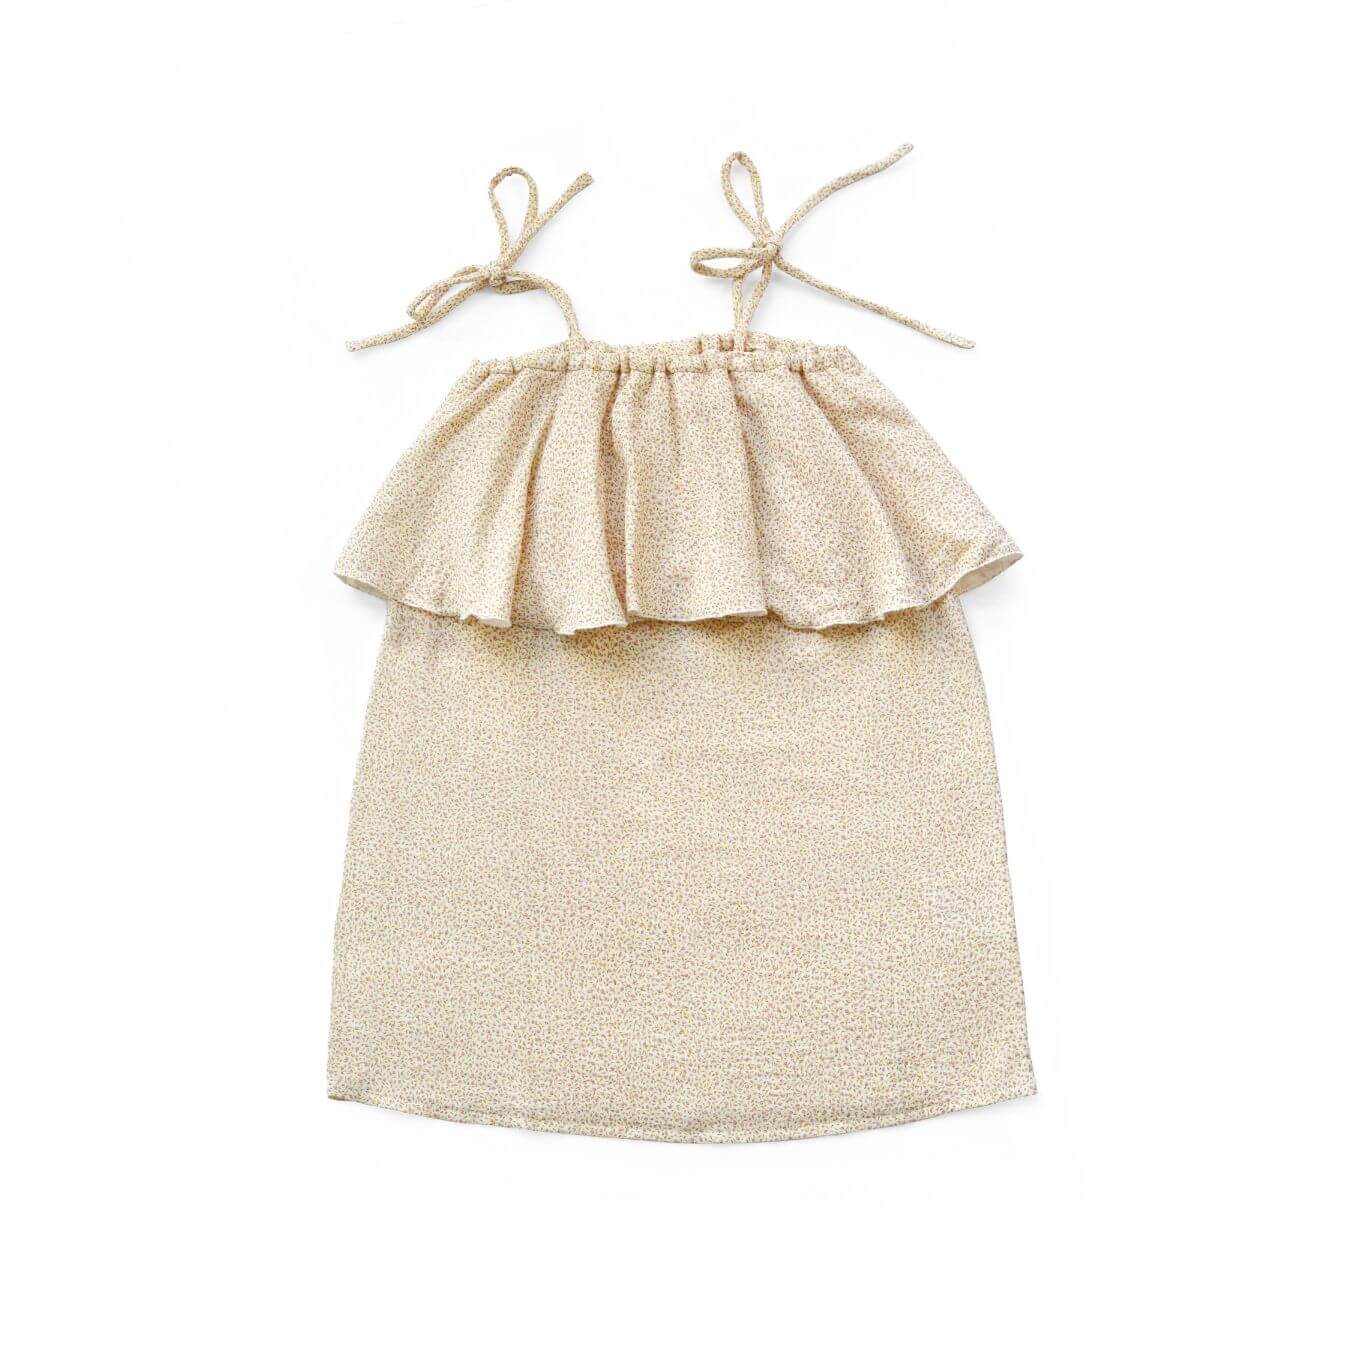 Organic muslin girls' dress is handcrafted by artisans; this breathable girls' dress will make sure you are comfortable and stylish. Organic muslin girls dress will grow with you with the help of adjustable stripes. Mini-me styles are available for Mommy and daughter days out online and in Hong Kong and Singapore.